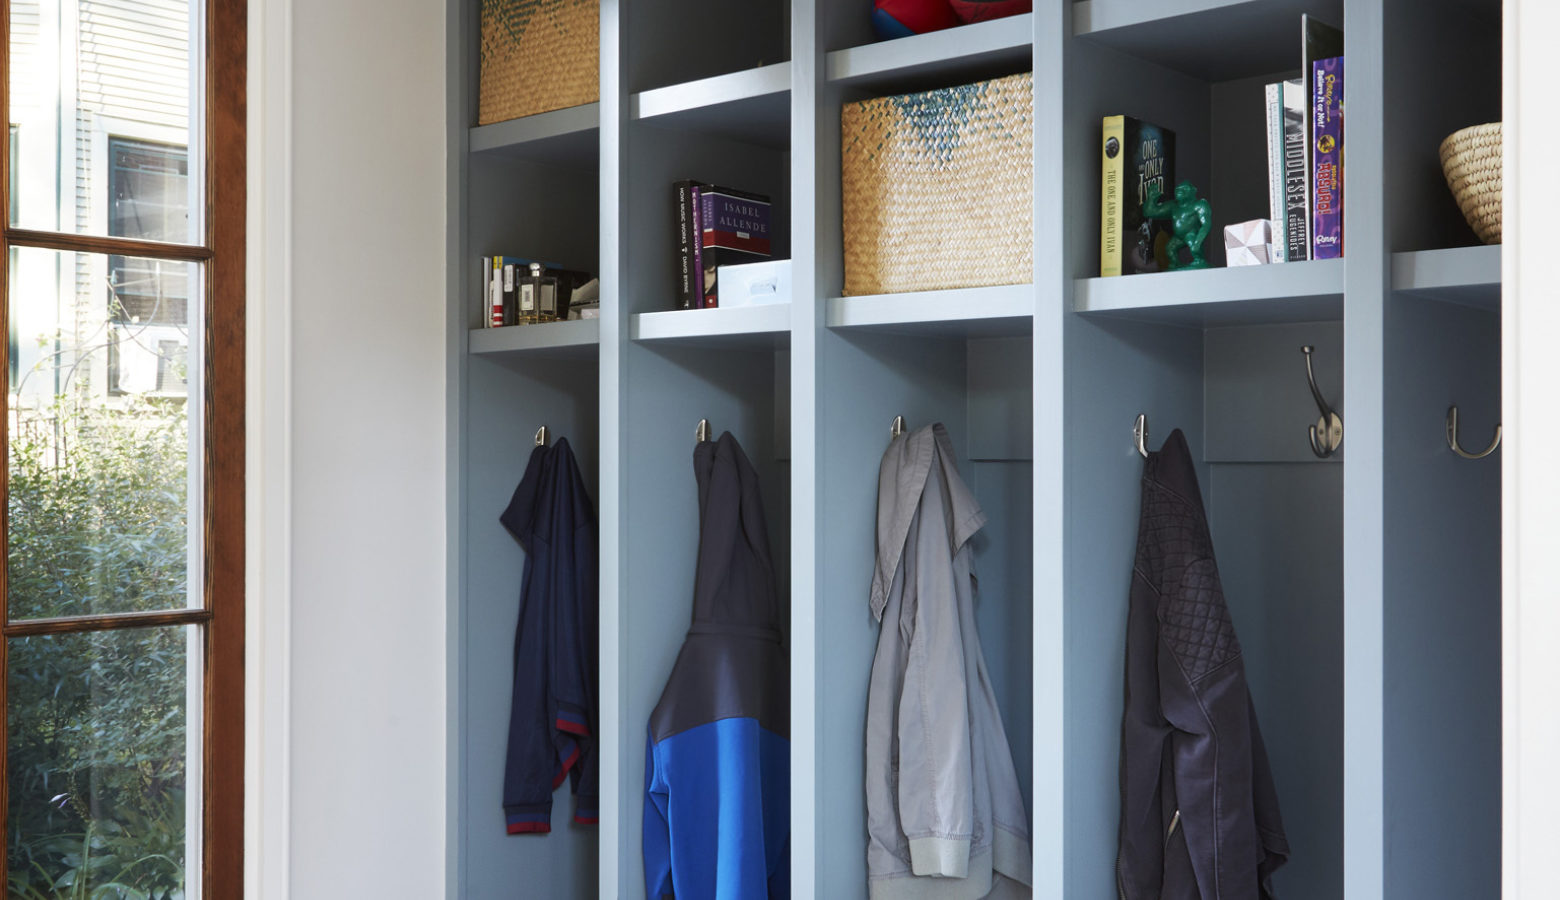 Residential Architecture: 5 Ideas for Designing a Mudroom